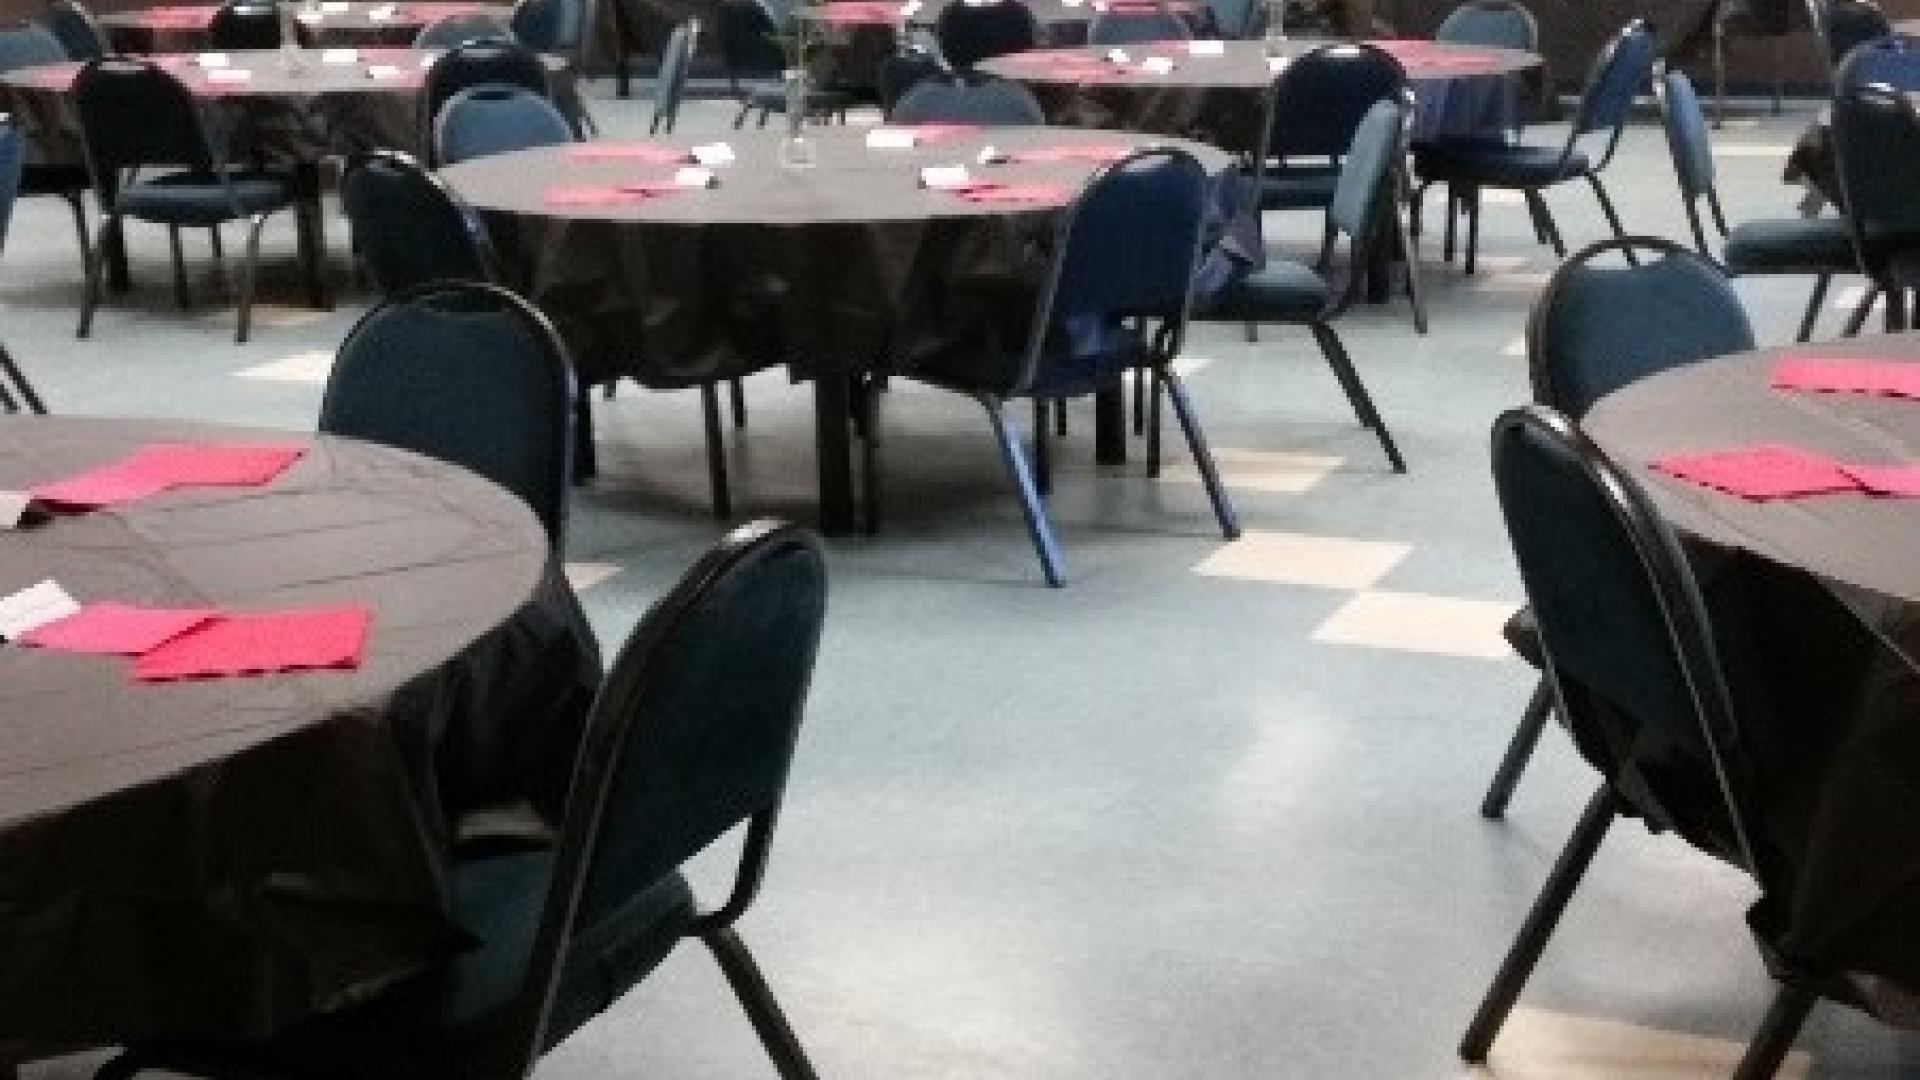 Tables and chairs spread throughout multi-purpose room.